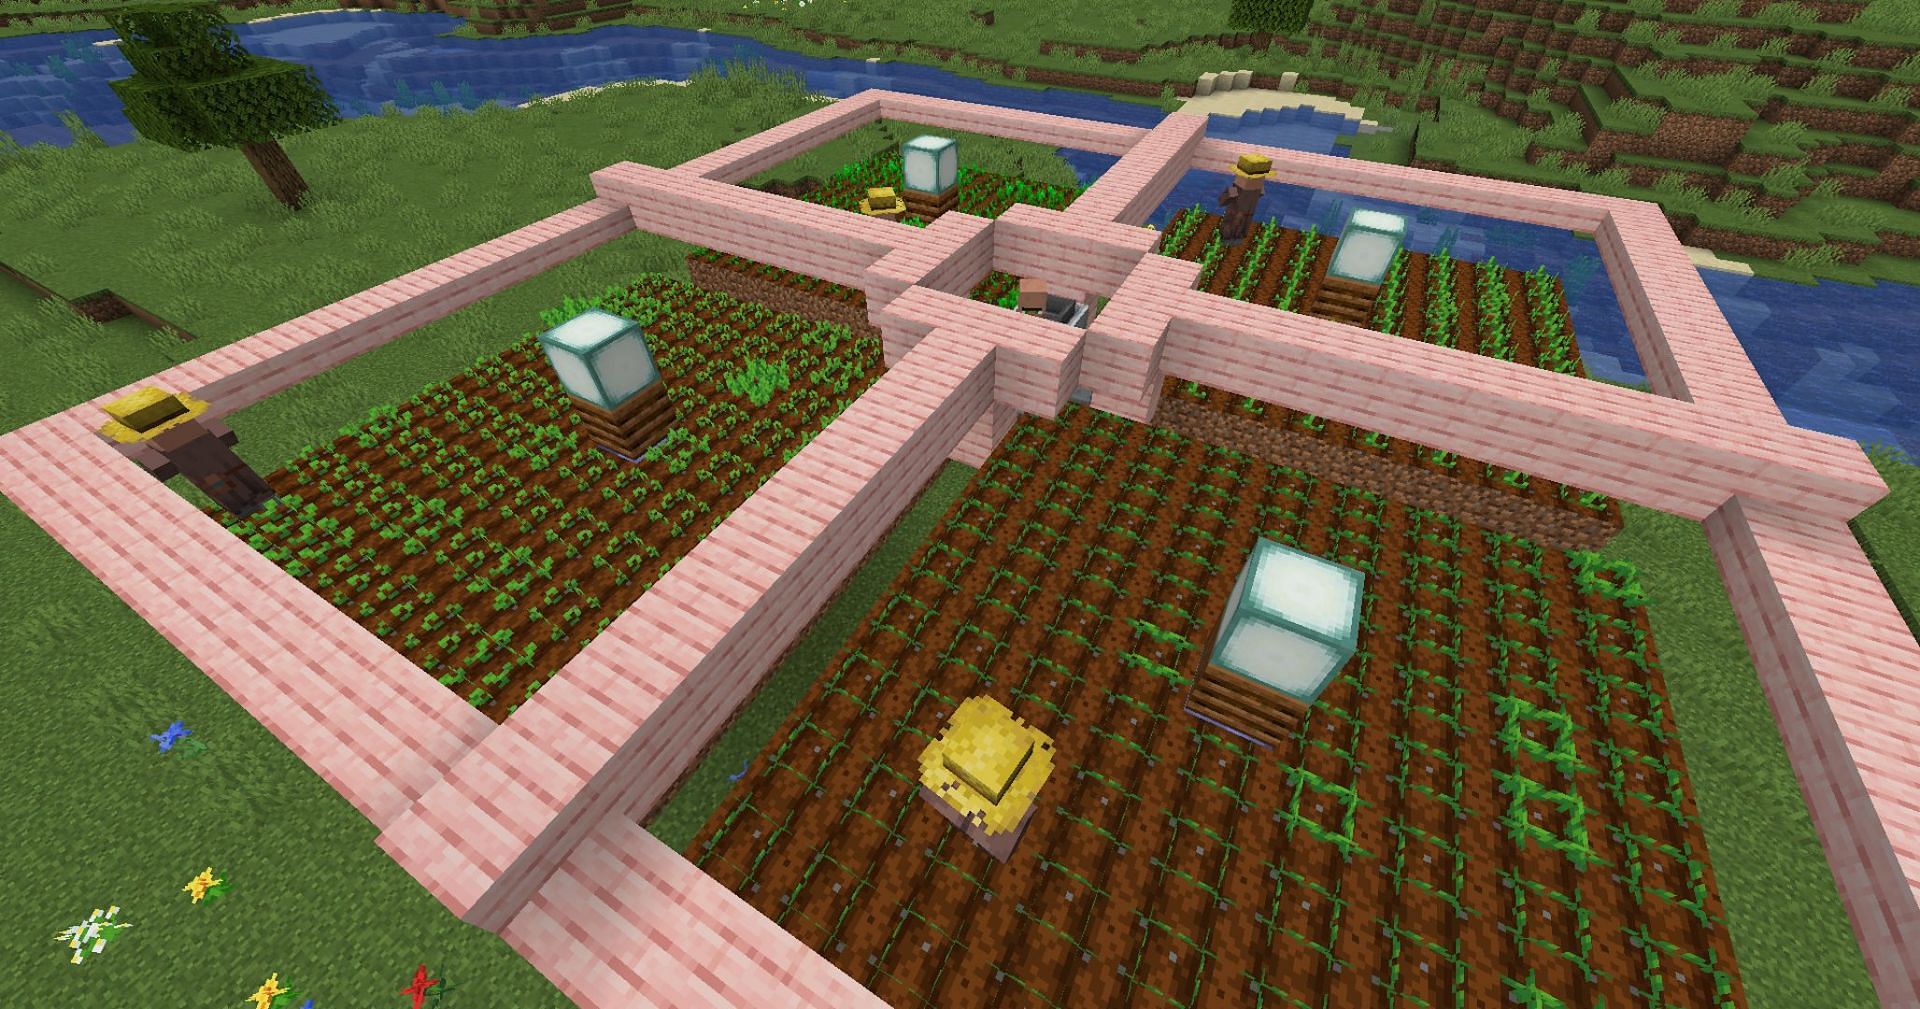 The farm looks much more lively with villagers added in (Image via Mojang)